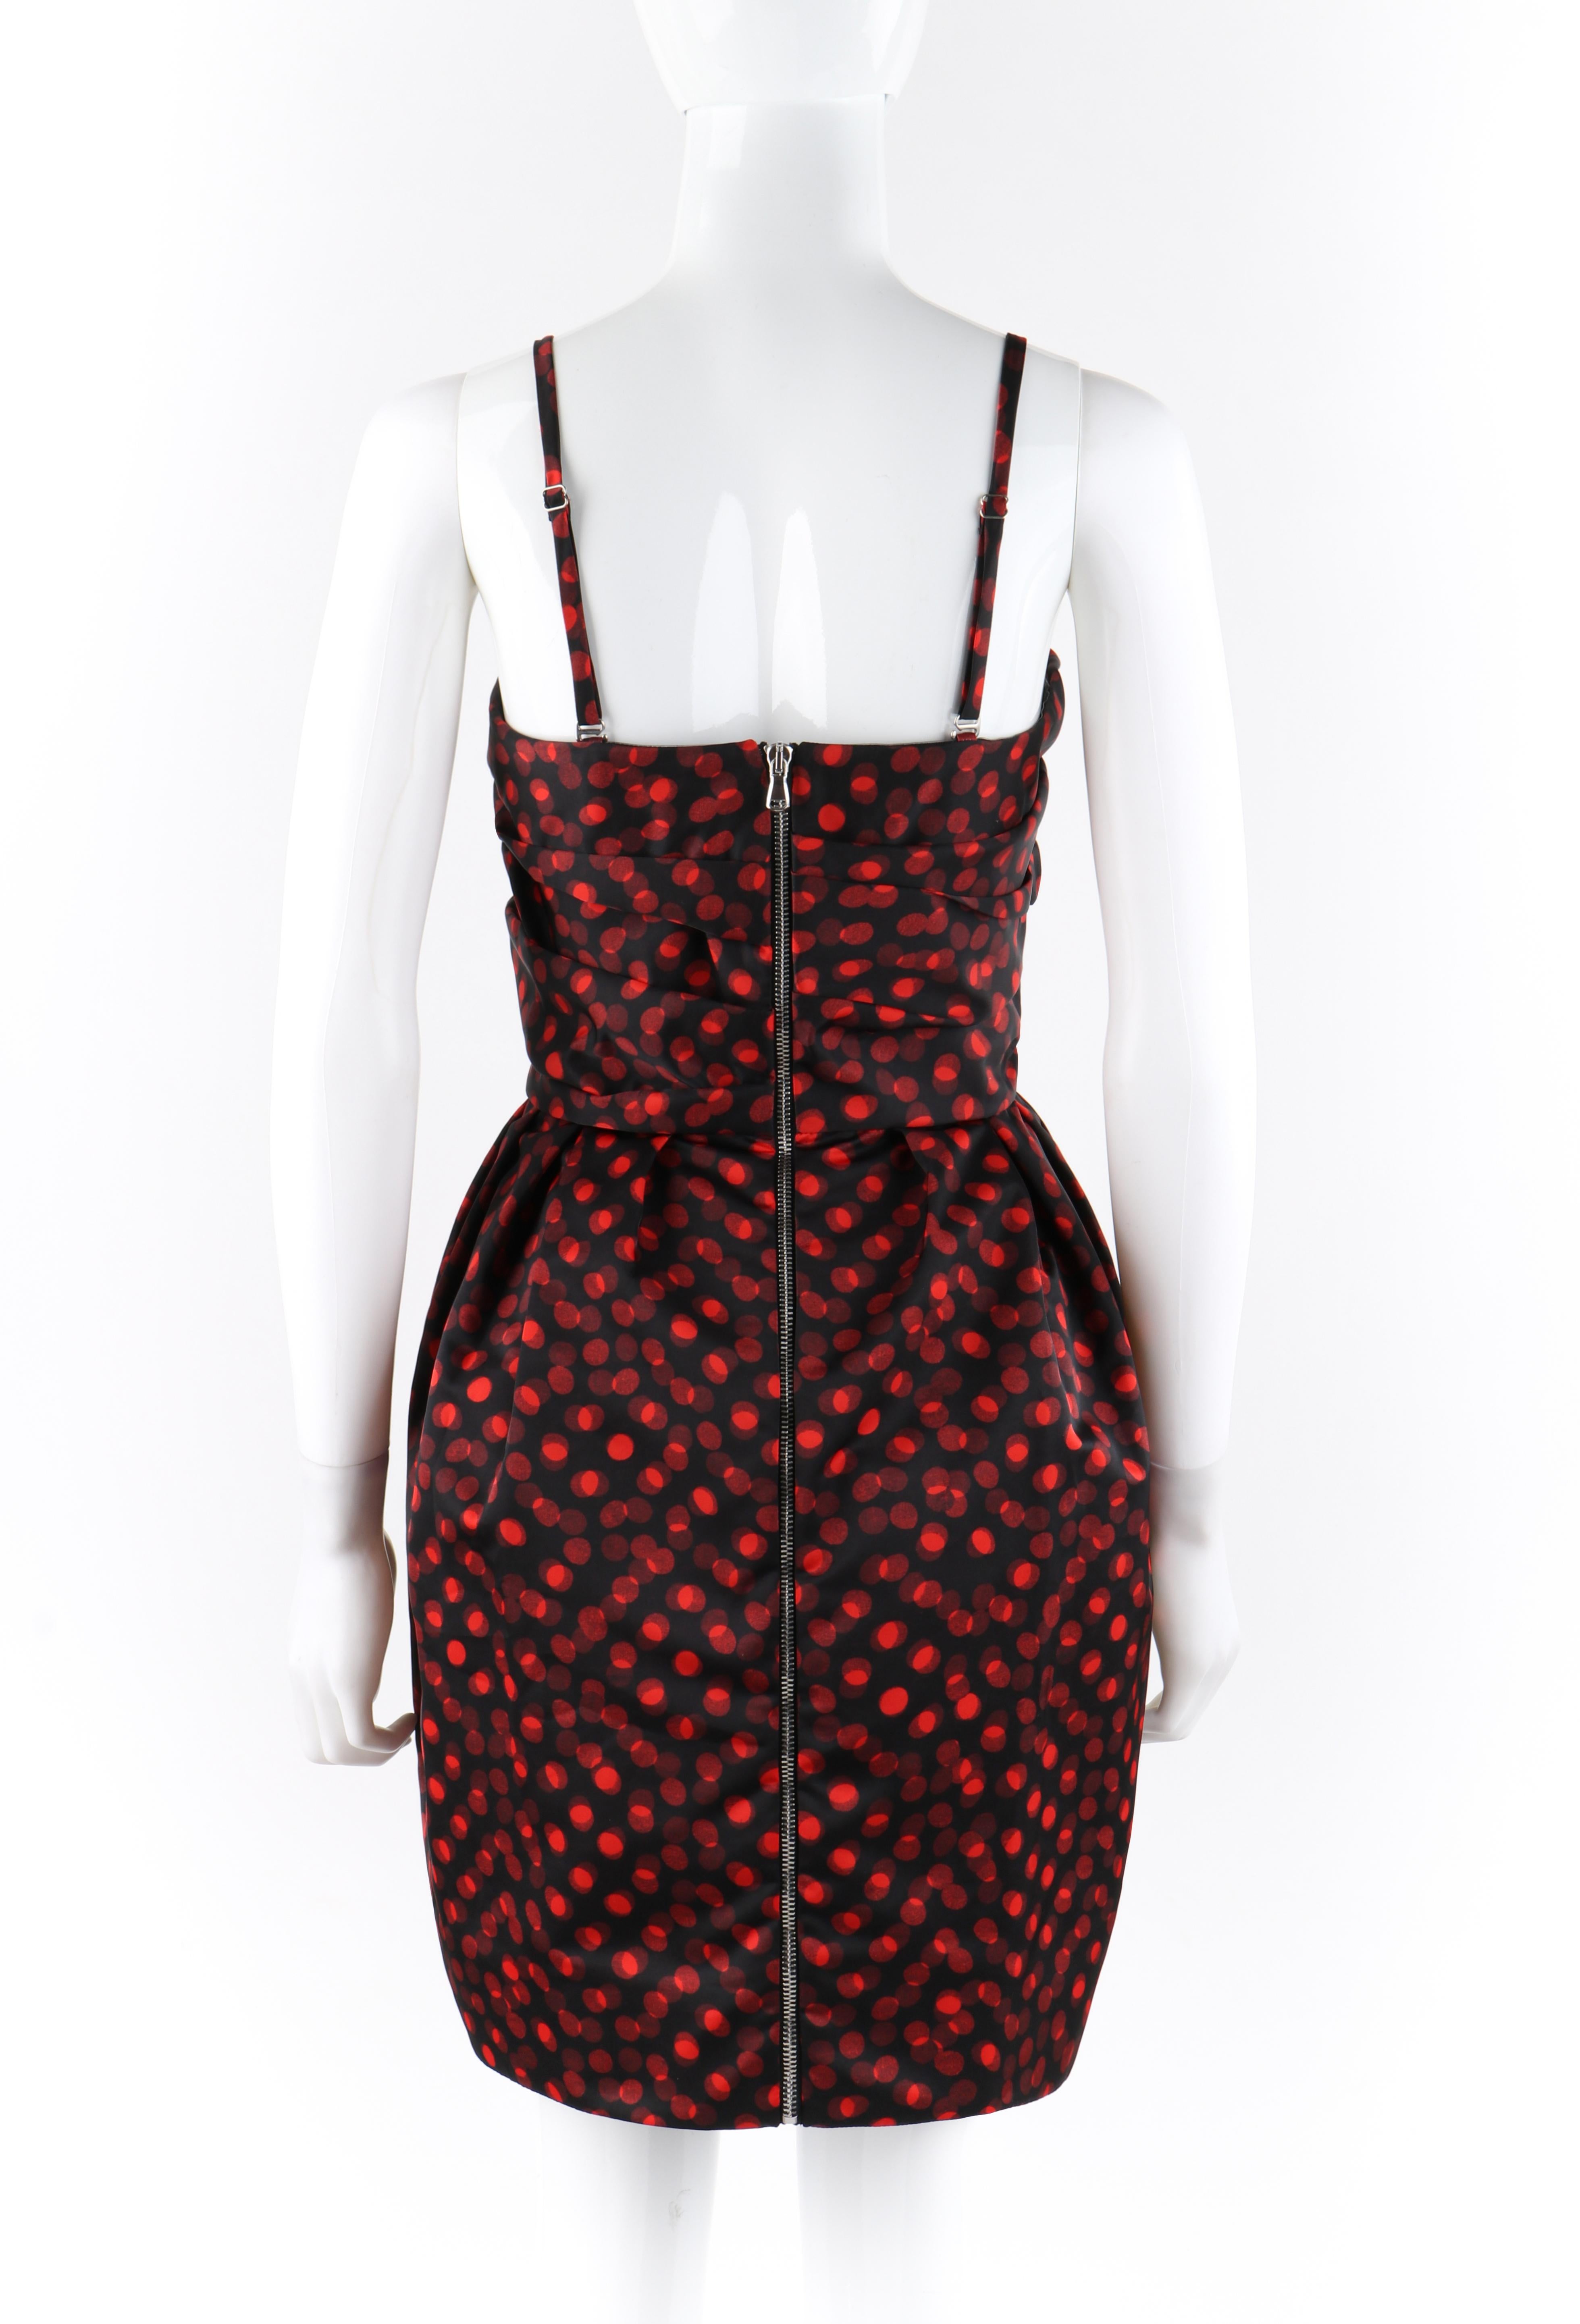 ALEXANDER McQUEEN McQ S/S 2016 Red Black Polka Dot Print Bubble Sleeveless Dress In Excellent Condition In Thiensville, WI